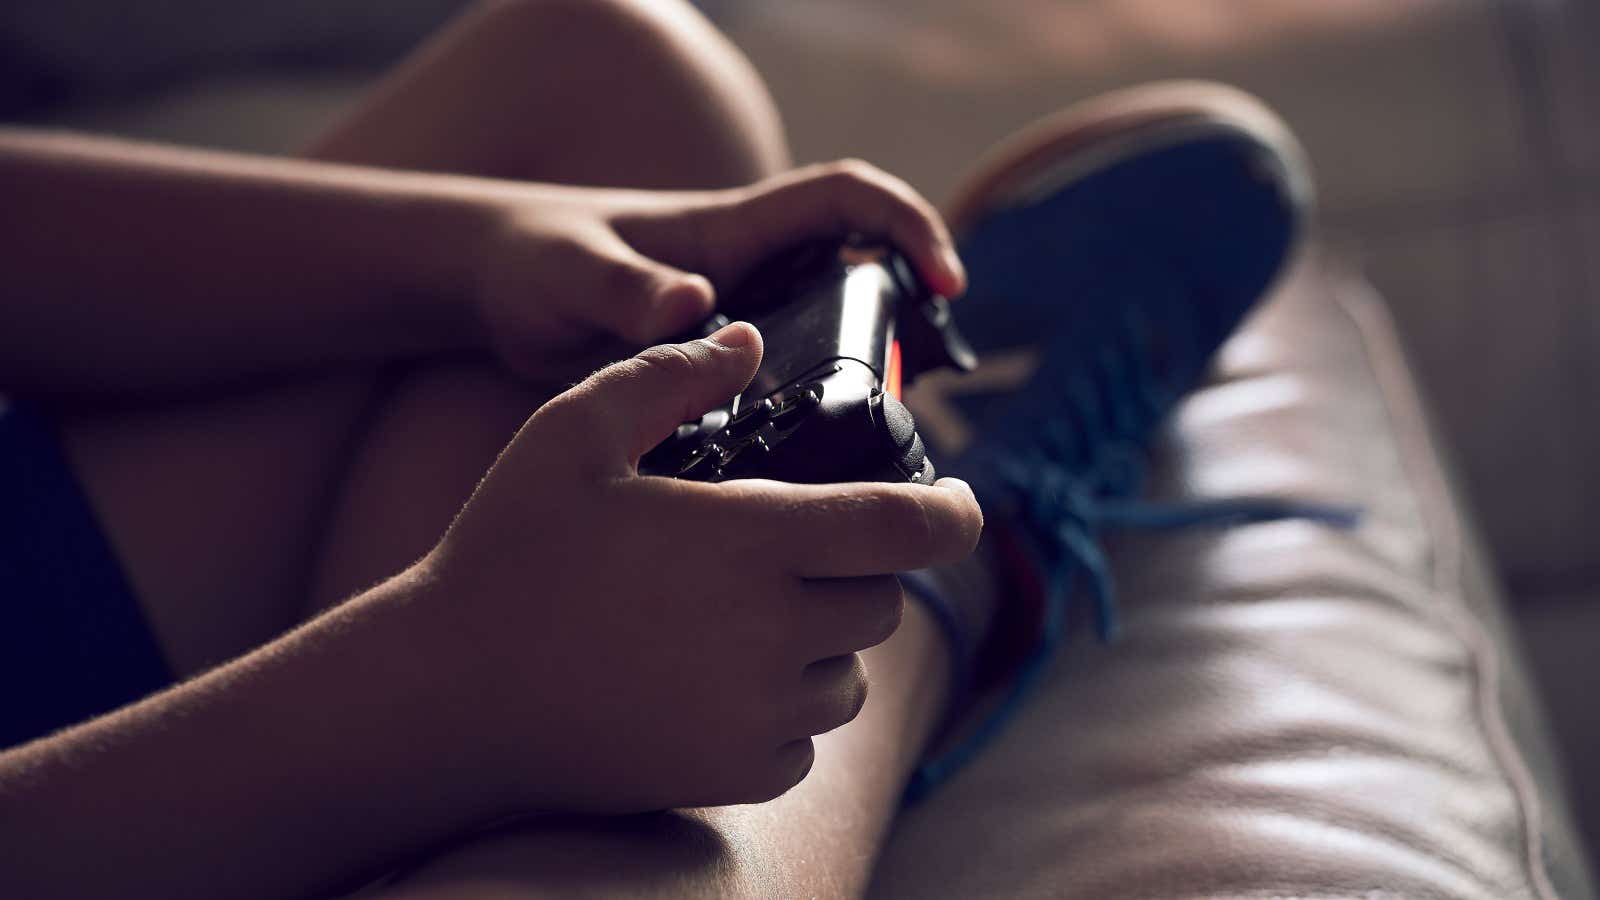 Top 35 best online games to play in 2023: For Adults, Boys, Girls